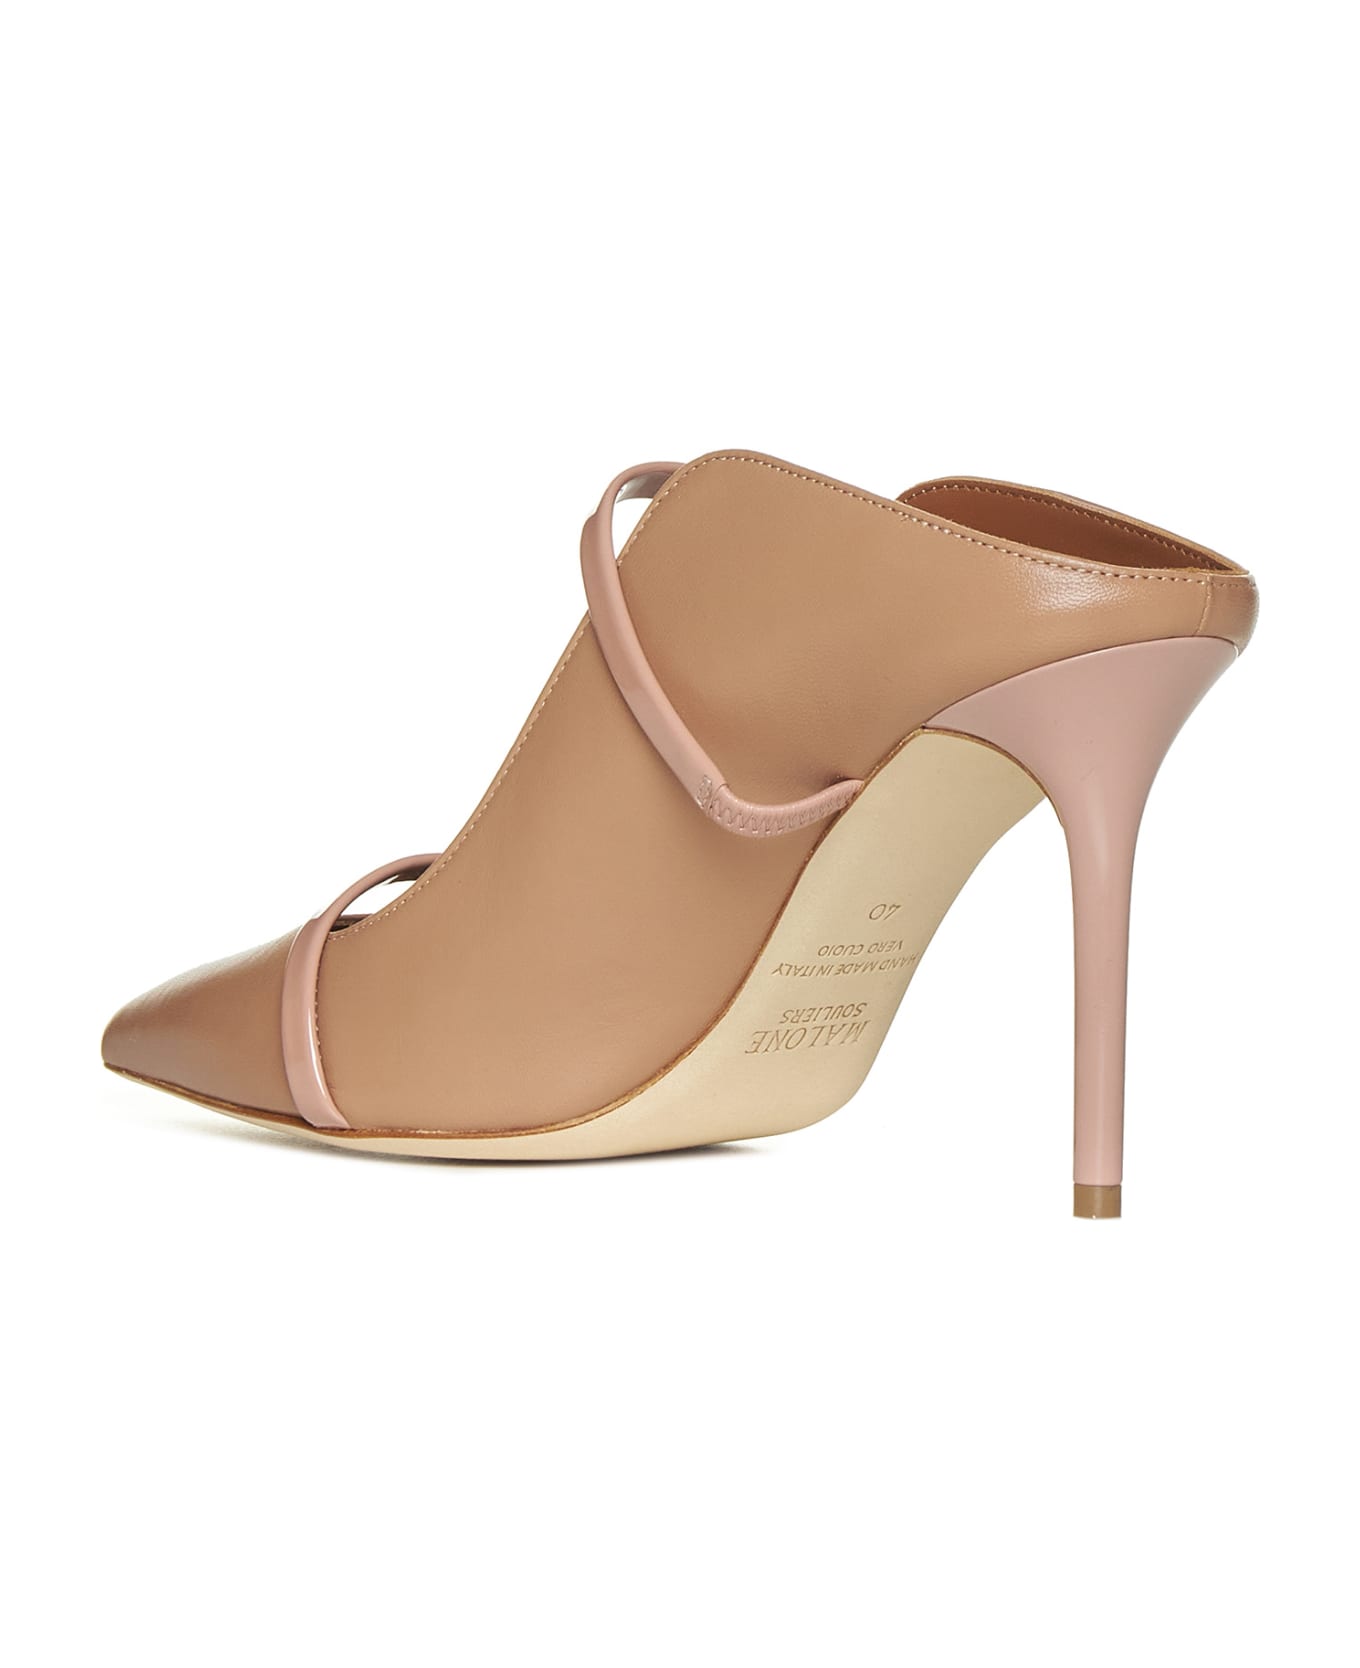 Malone Souliers Flat Shoes - Nude/blush nud